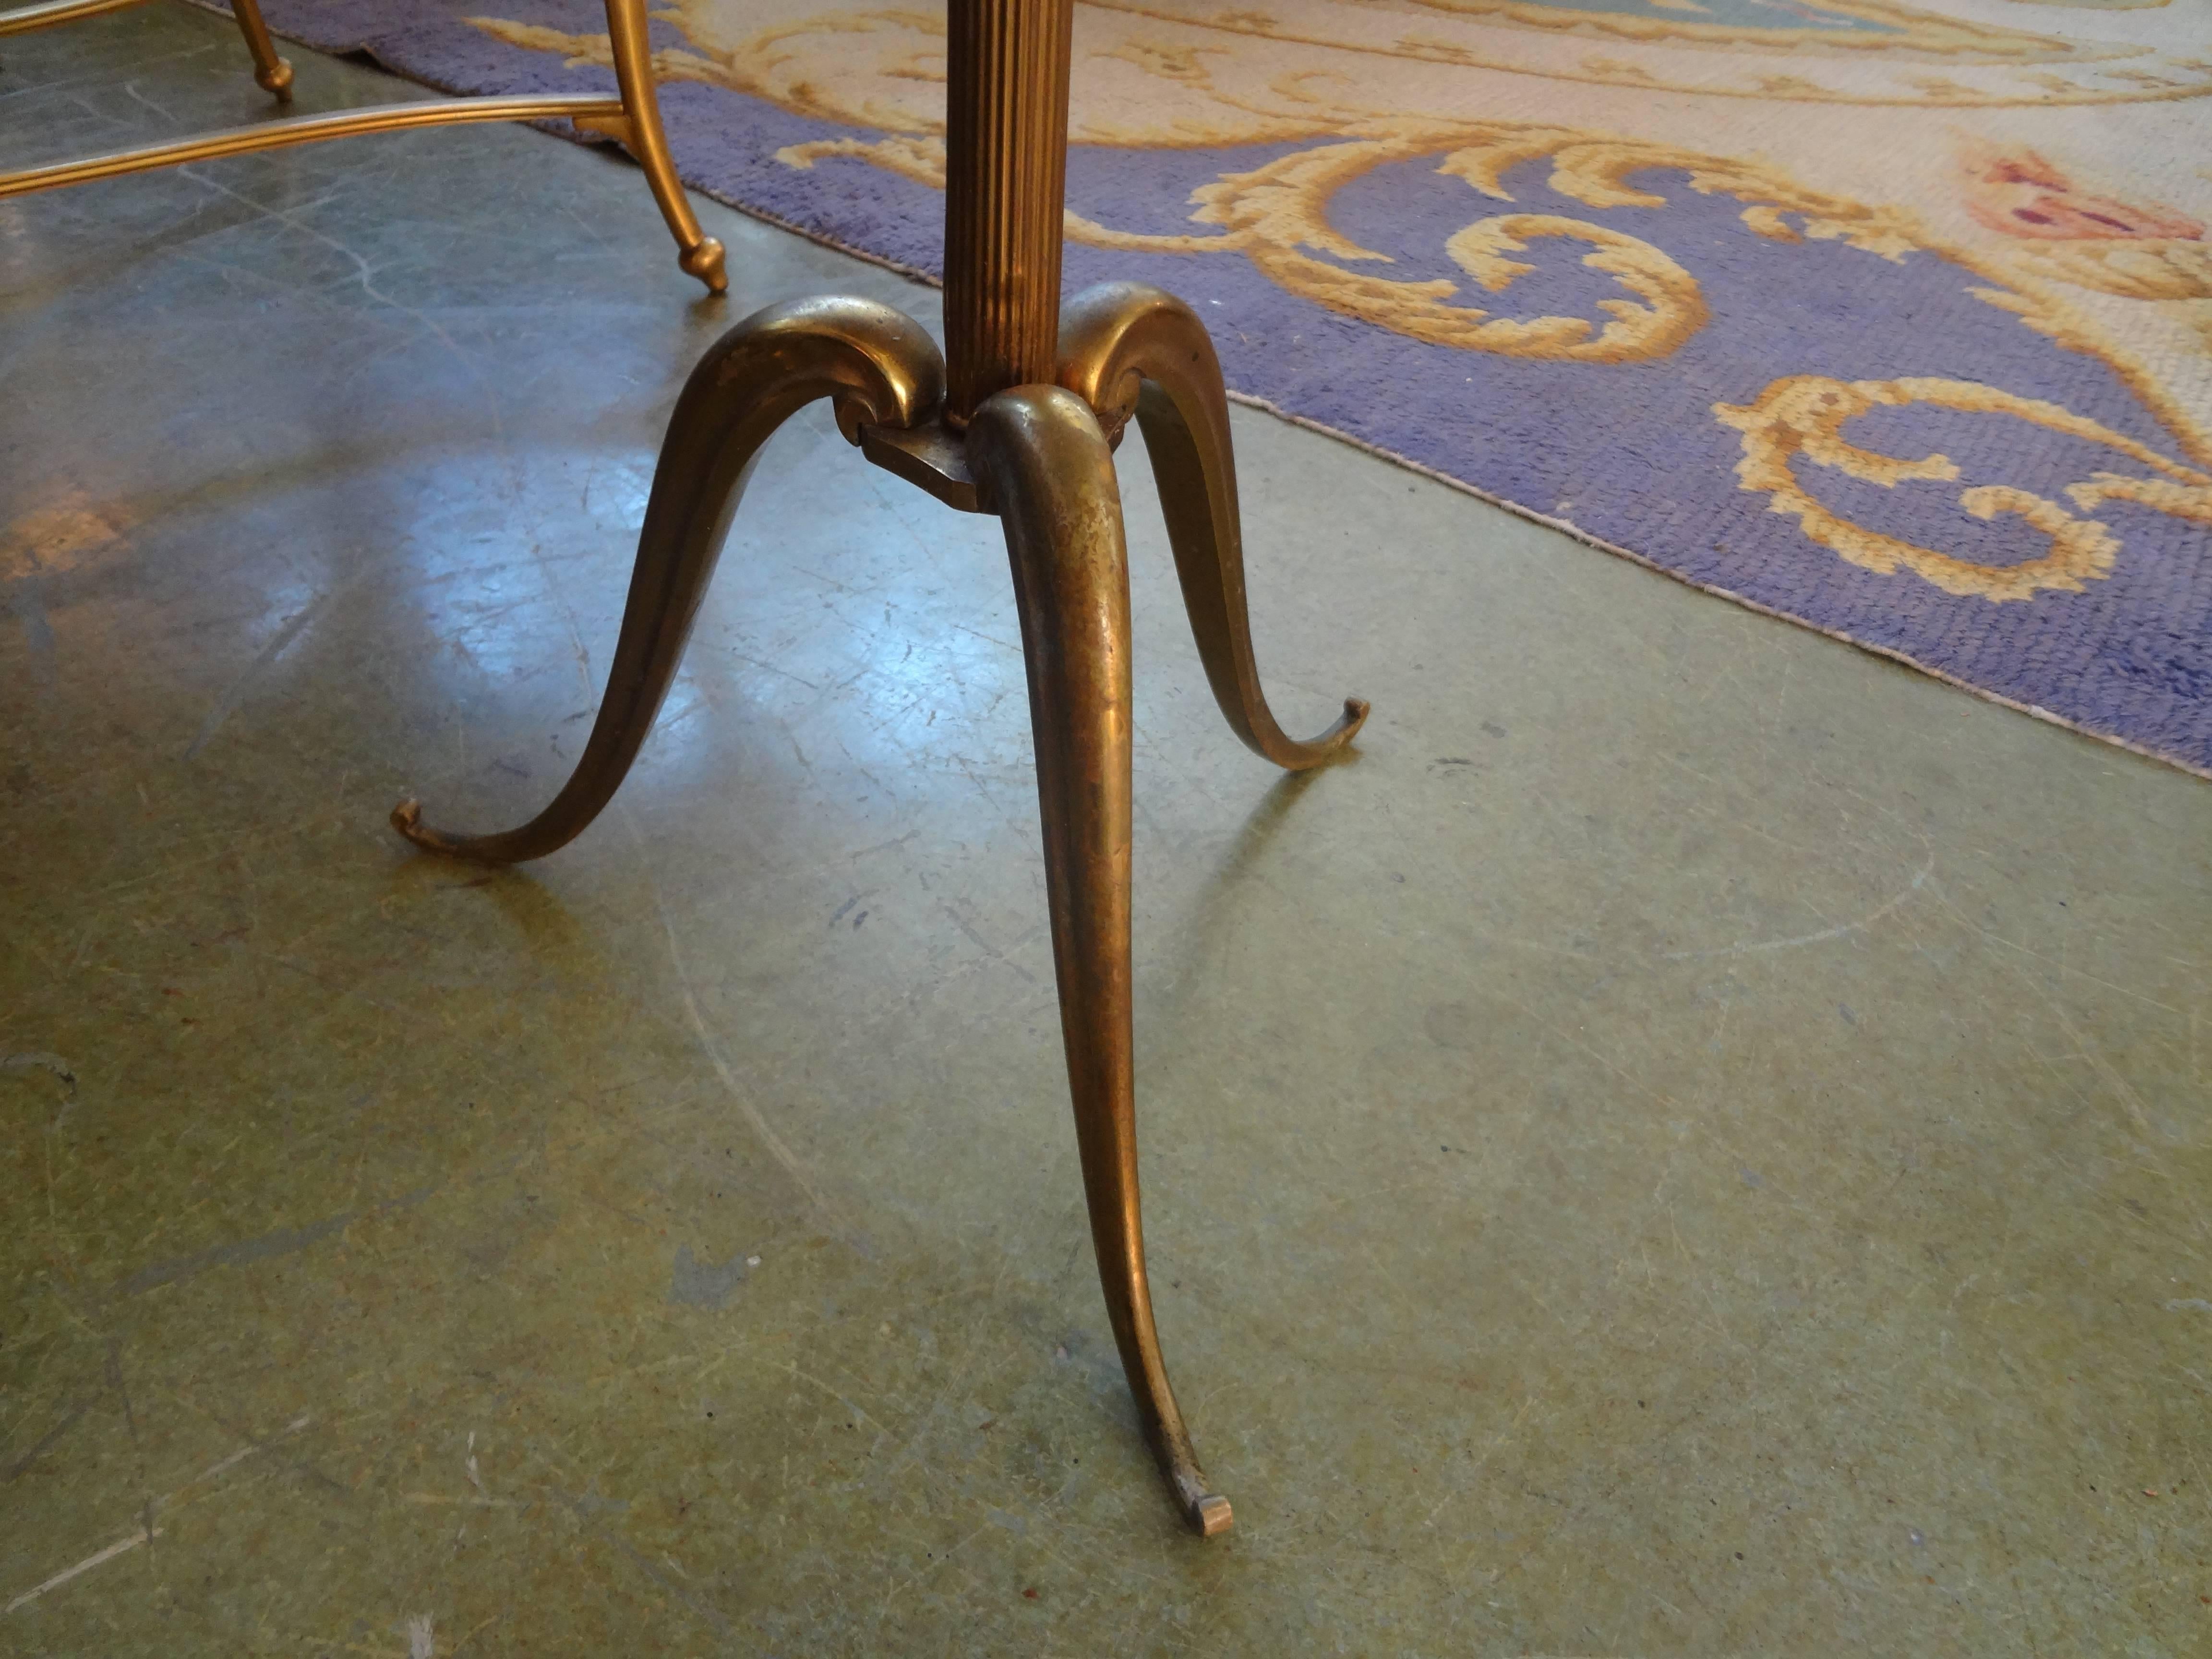 Stylish French 1940's bronze or brass table with tripod legs and gallery top with marbellized mirror in The Style Of Jacques Adnet, circa. 1940. Gorgeous patina to bronze.